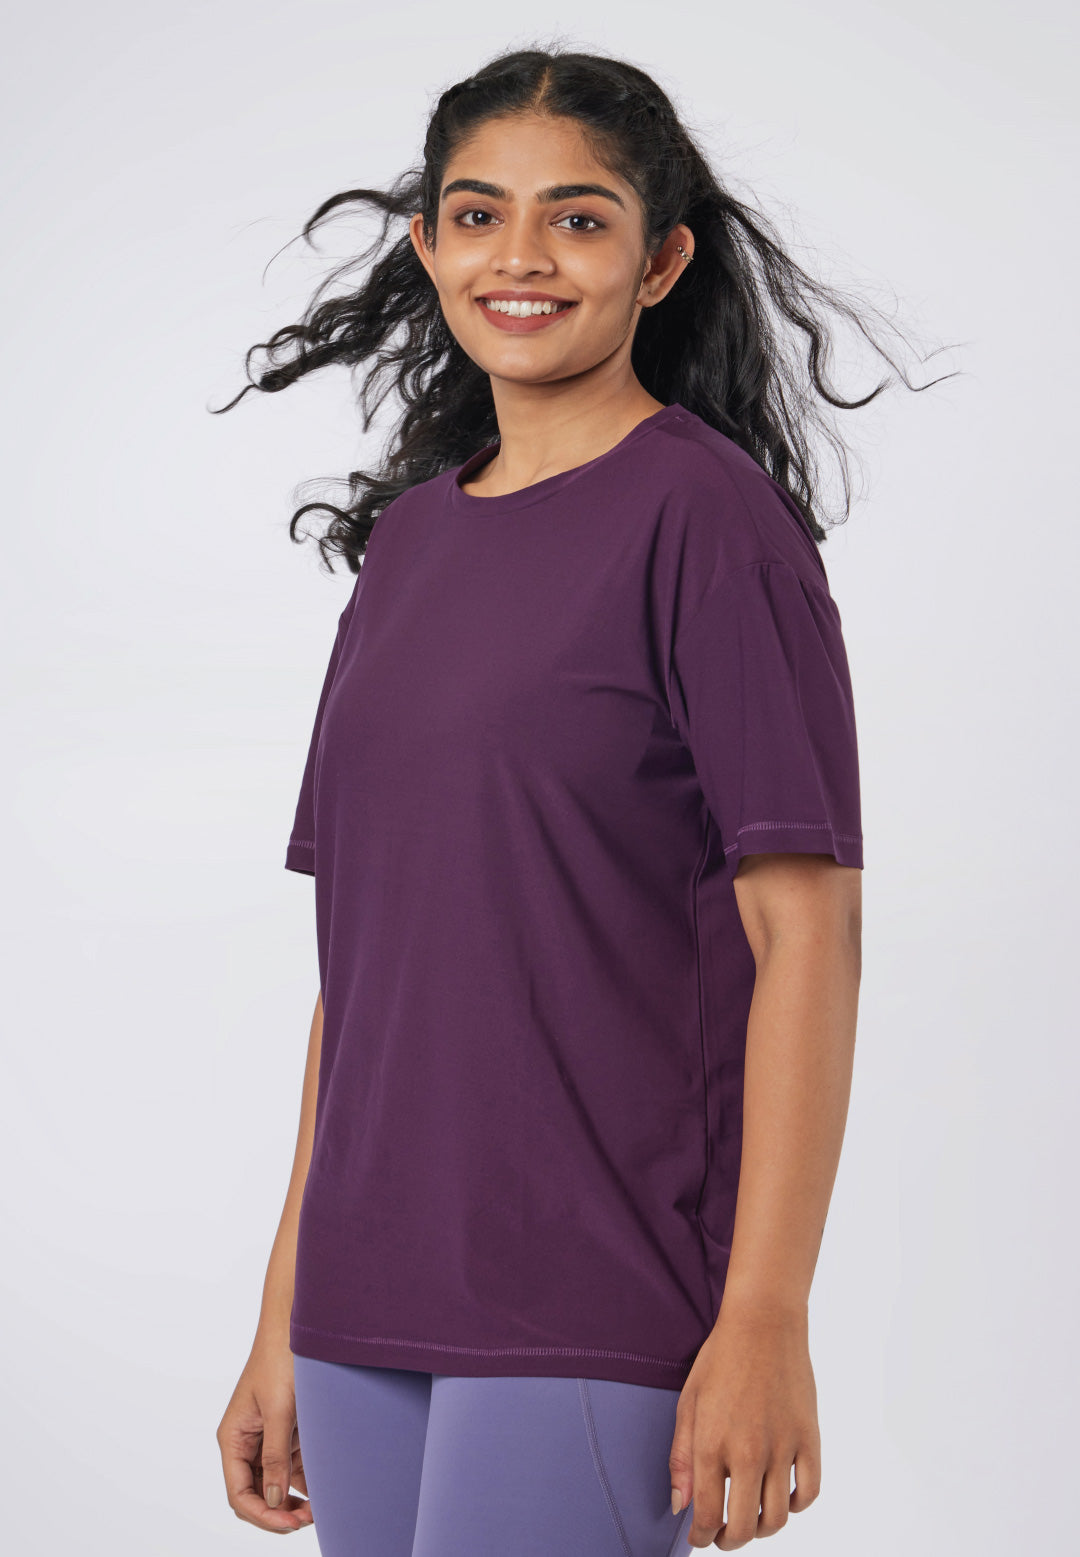 Buy Loose T-Shirts for Women & Girls Online from Blissclub